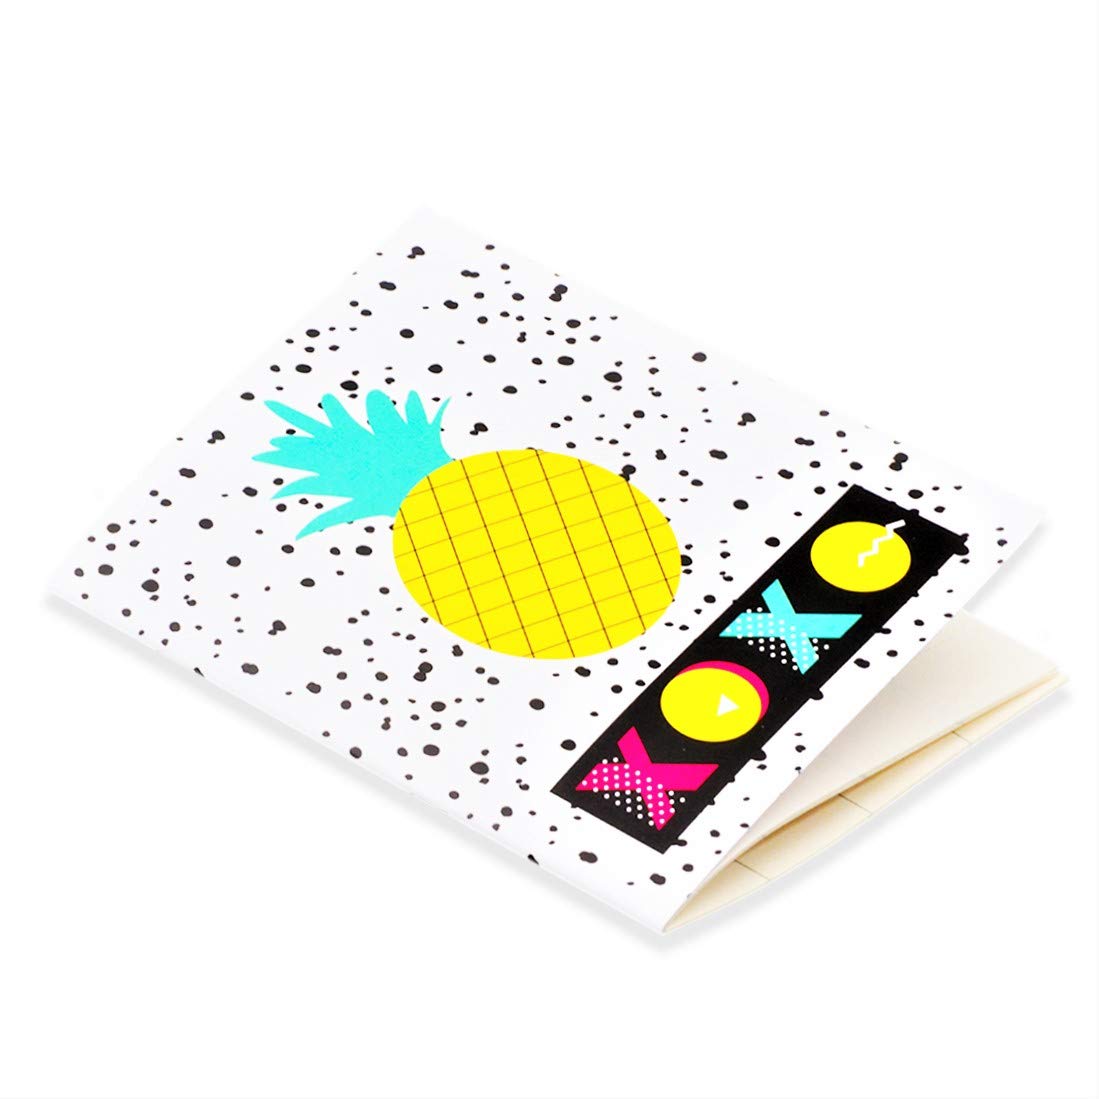 MONTHLY PLANNER UNDATED YEAR ROUND FLEXIBLE PINEAPPLE Cover Goal/Time Organizer Eco Friendly Customizable Stitch Bound 16 Months 18 Sheets Set of 2 Diaries